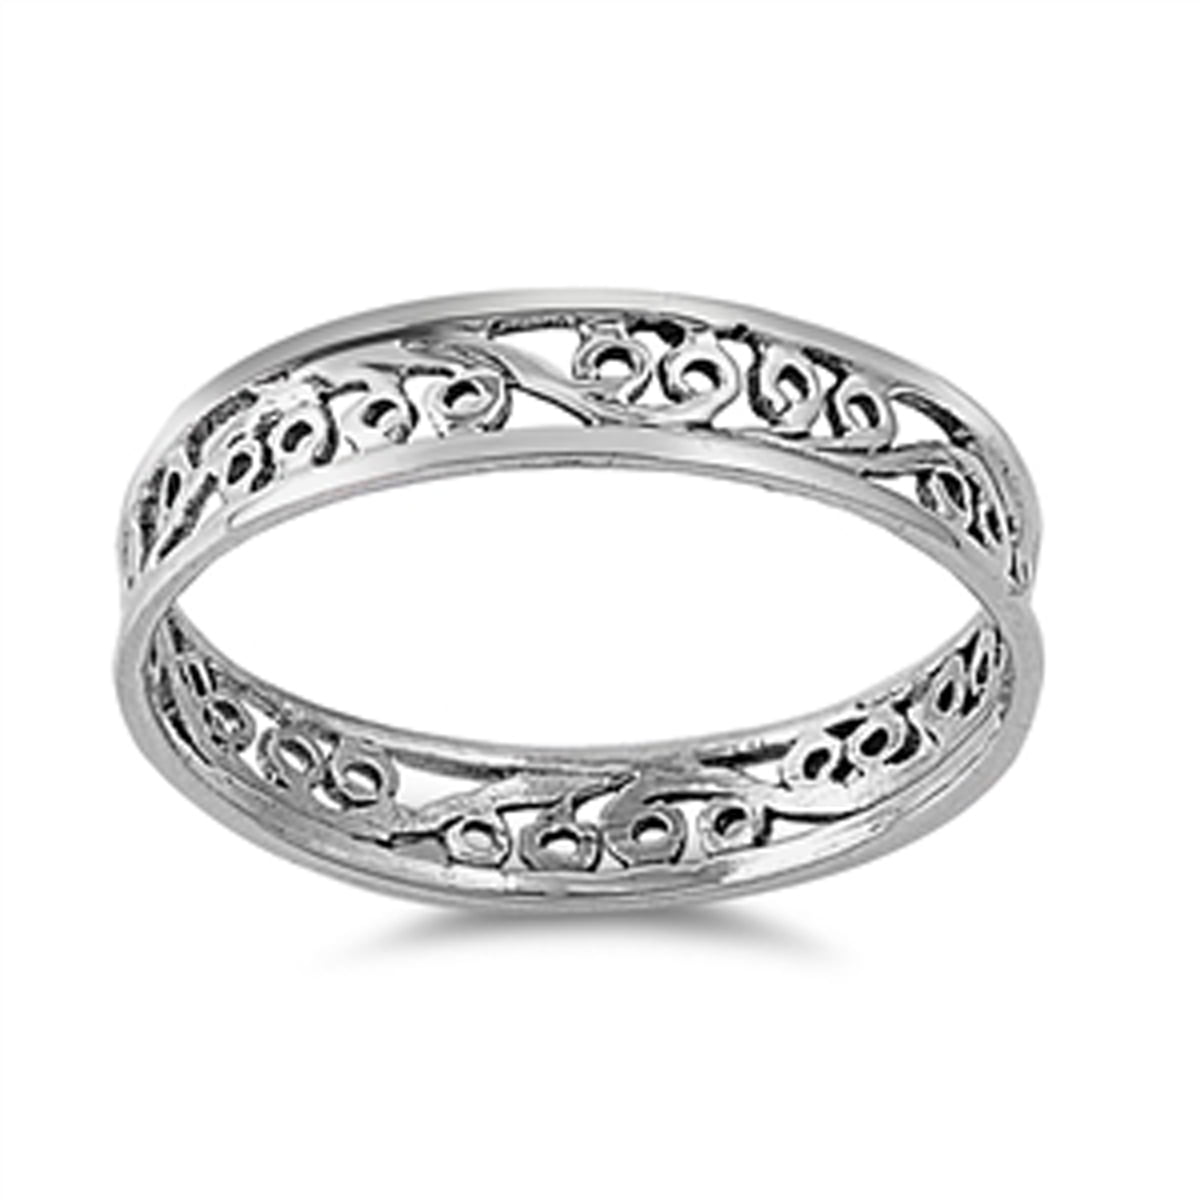 sterling-silver-women-s-filigree-cutout-eternity-ring-sizes-4-12